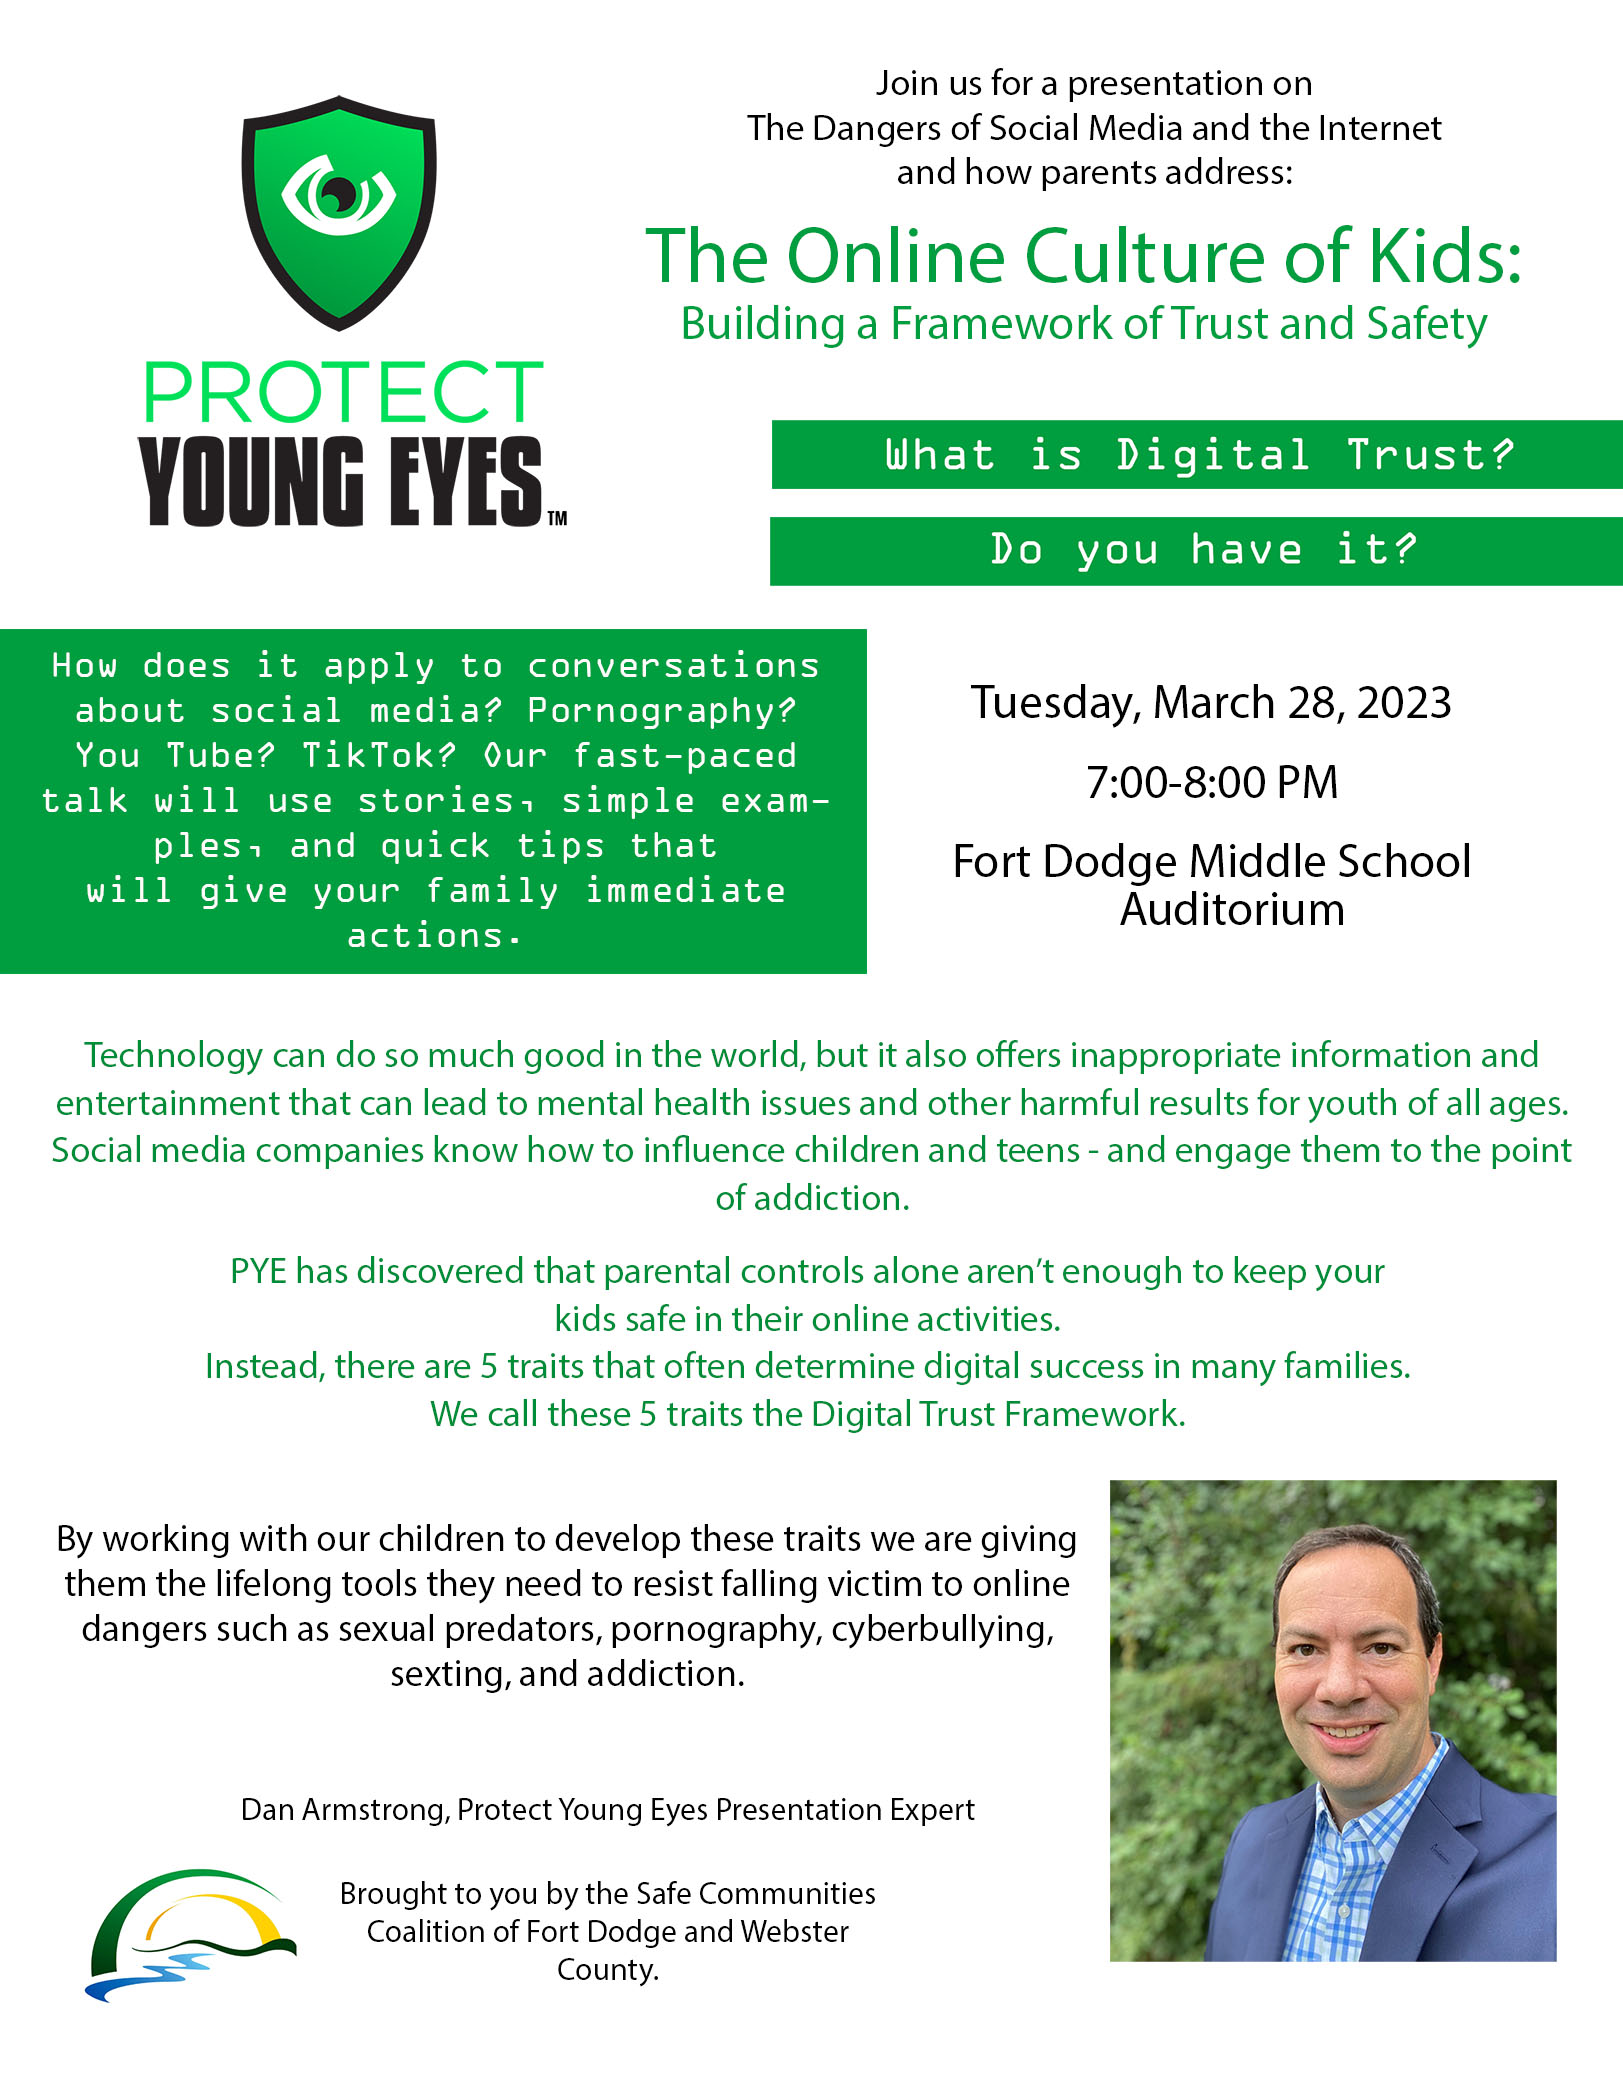 <h1 class="tribe-events-single-event-title">The Online Culture of Kids: Building a Framework of Trust and Safety</h1>